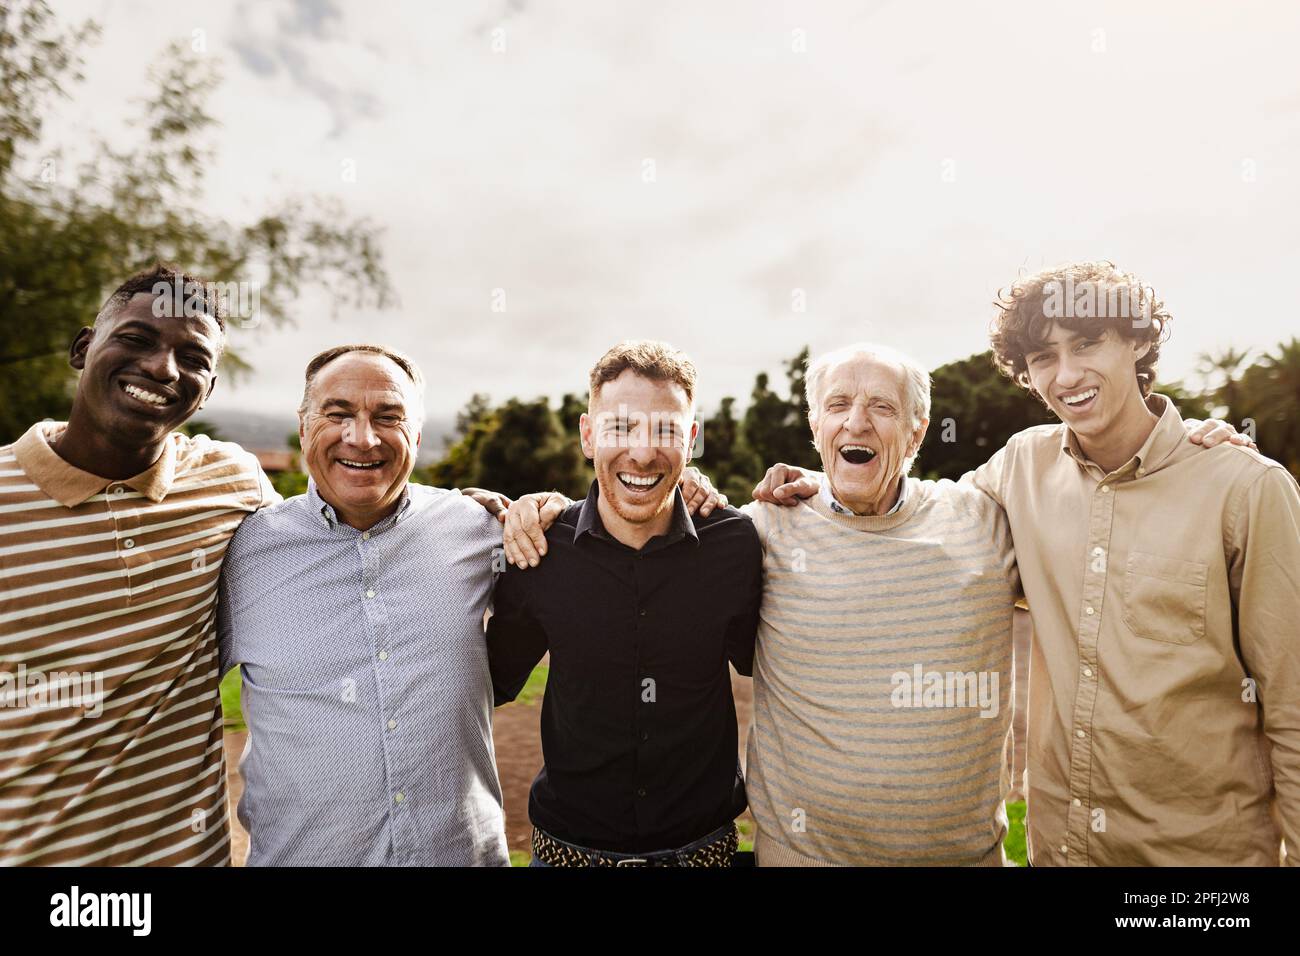 Happy multigenerational group of men with different ages and ethnicities having fun smiling in front of camera at park Stock Photo